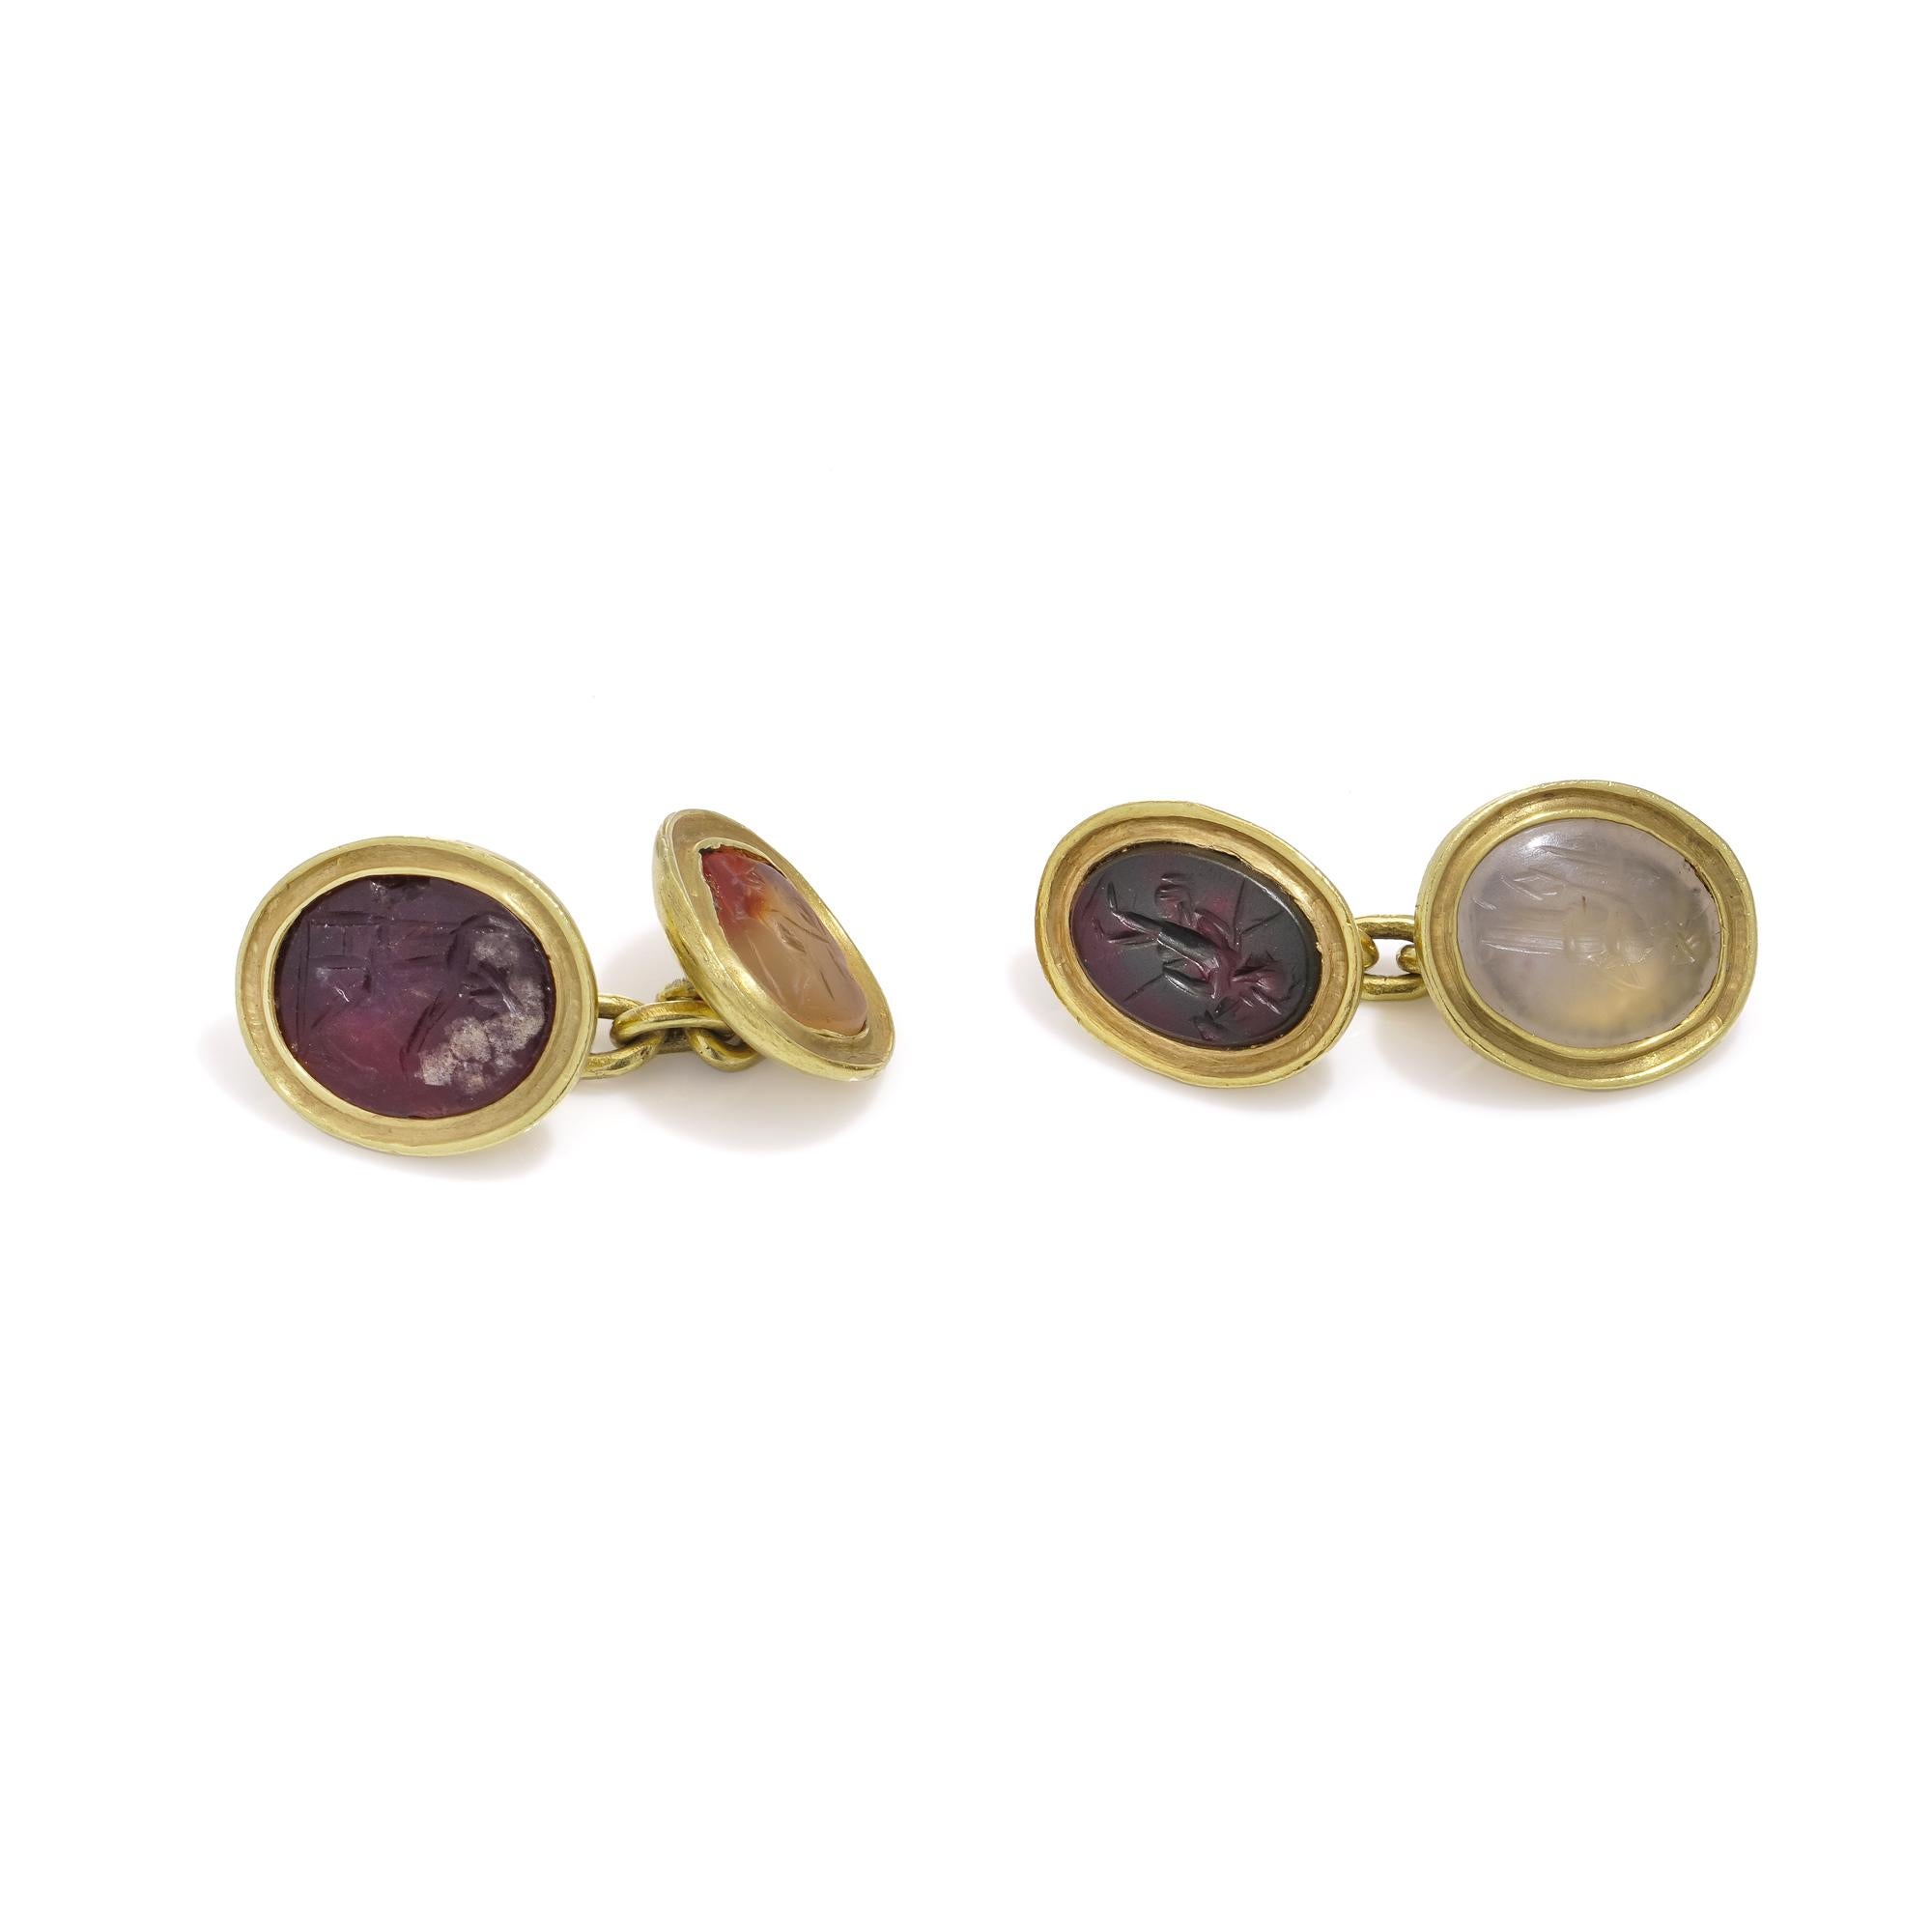 Classical Roman Antique 22kt yellow gold cufflinks, each adorned with Roman 4 carved hardstone For Sale